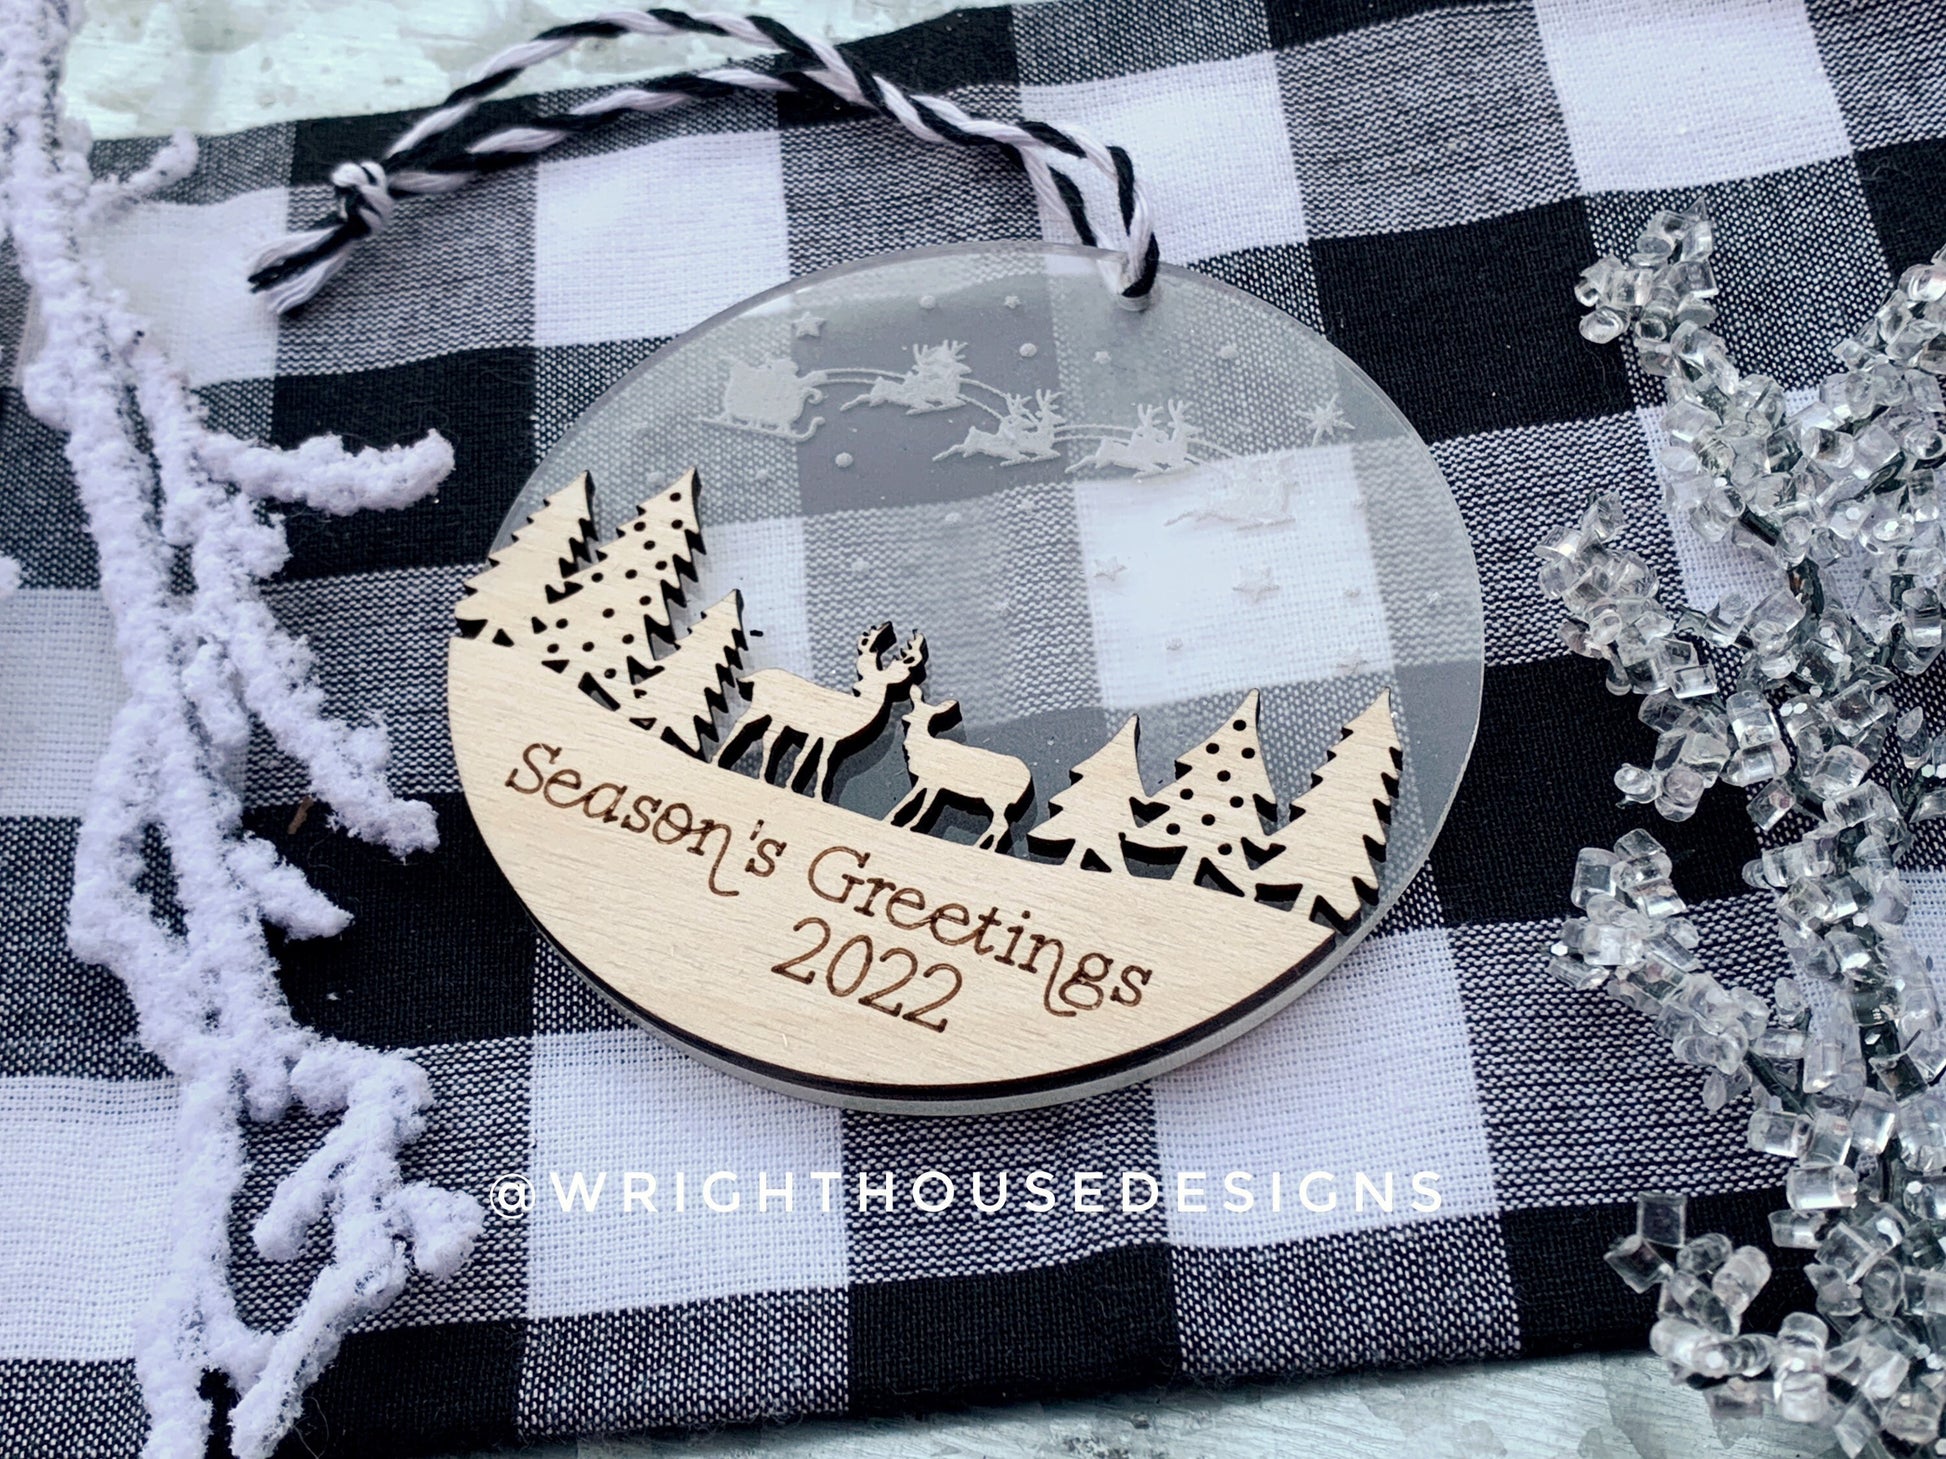 Santa’s Sleigh - Winter Woodland Deer Scene - Yearly Christmas Eve Tree Ornament - Layered Wood and Acrylic - Stocking Tag - Holiday Decor